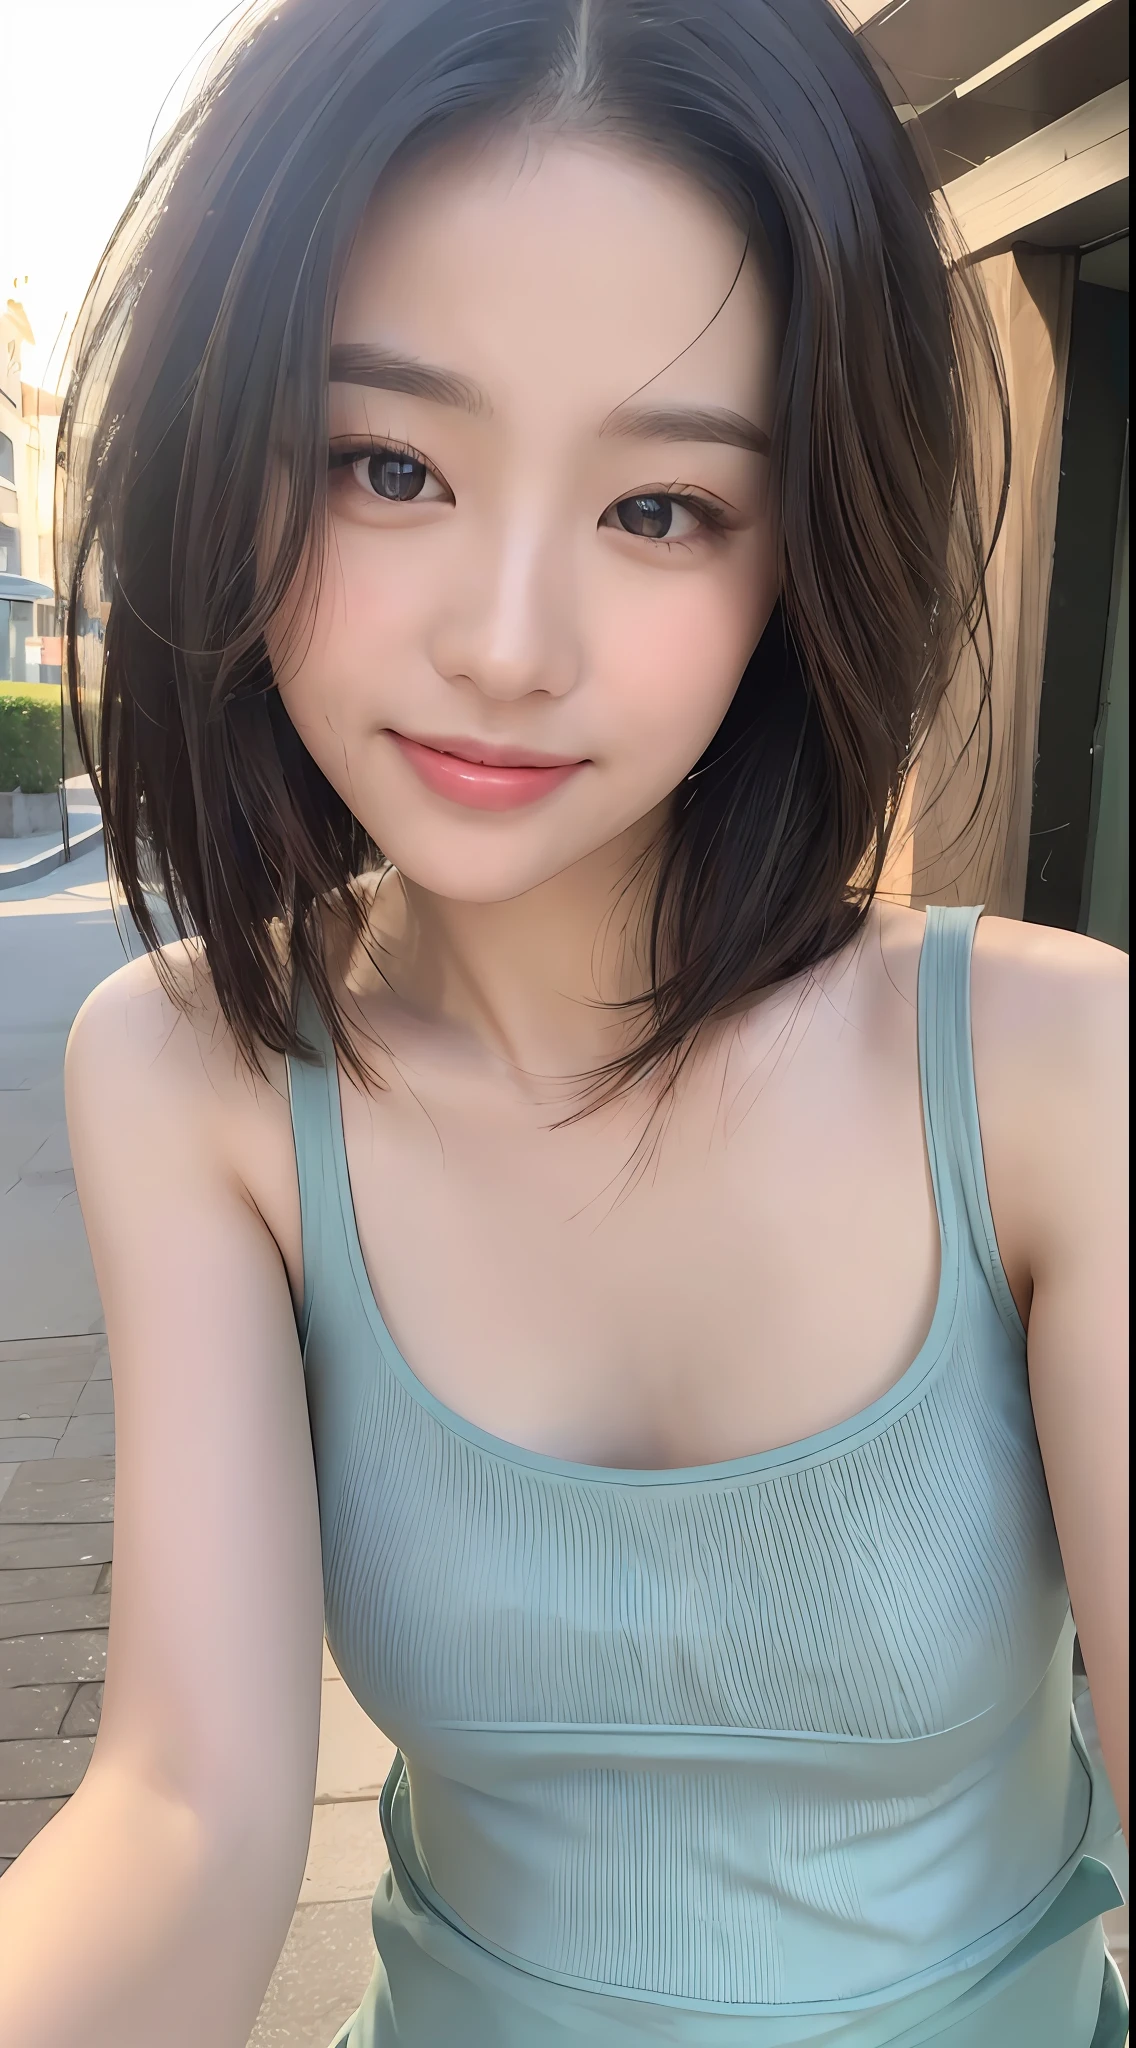 ((Best quality, 8k, Masterpiece :1.3)), Sharp focus:1.2, Perfect Body Beauty:1.4, Slim Abs:1.2, ((Layered hairstyle, Smile with lips closed:1.2)), (Tank top shirt:1.1), (Street:1.2), Highly detailed face and skin texture, Fine eyes, Double eyelids